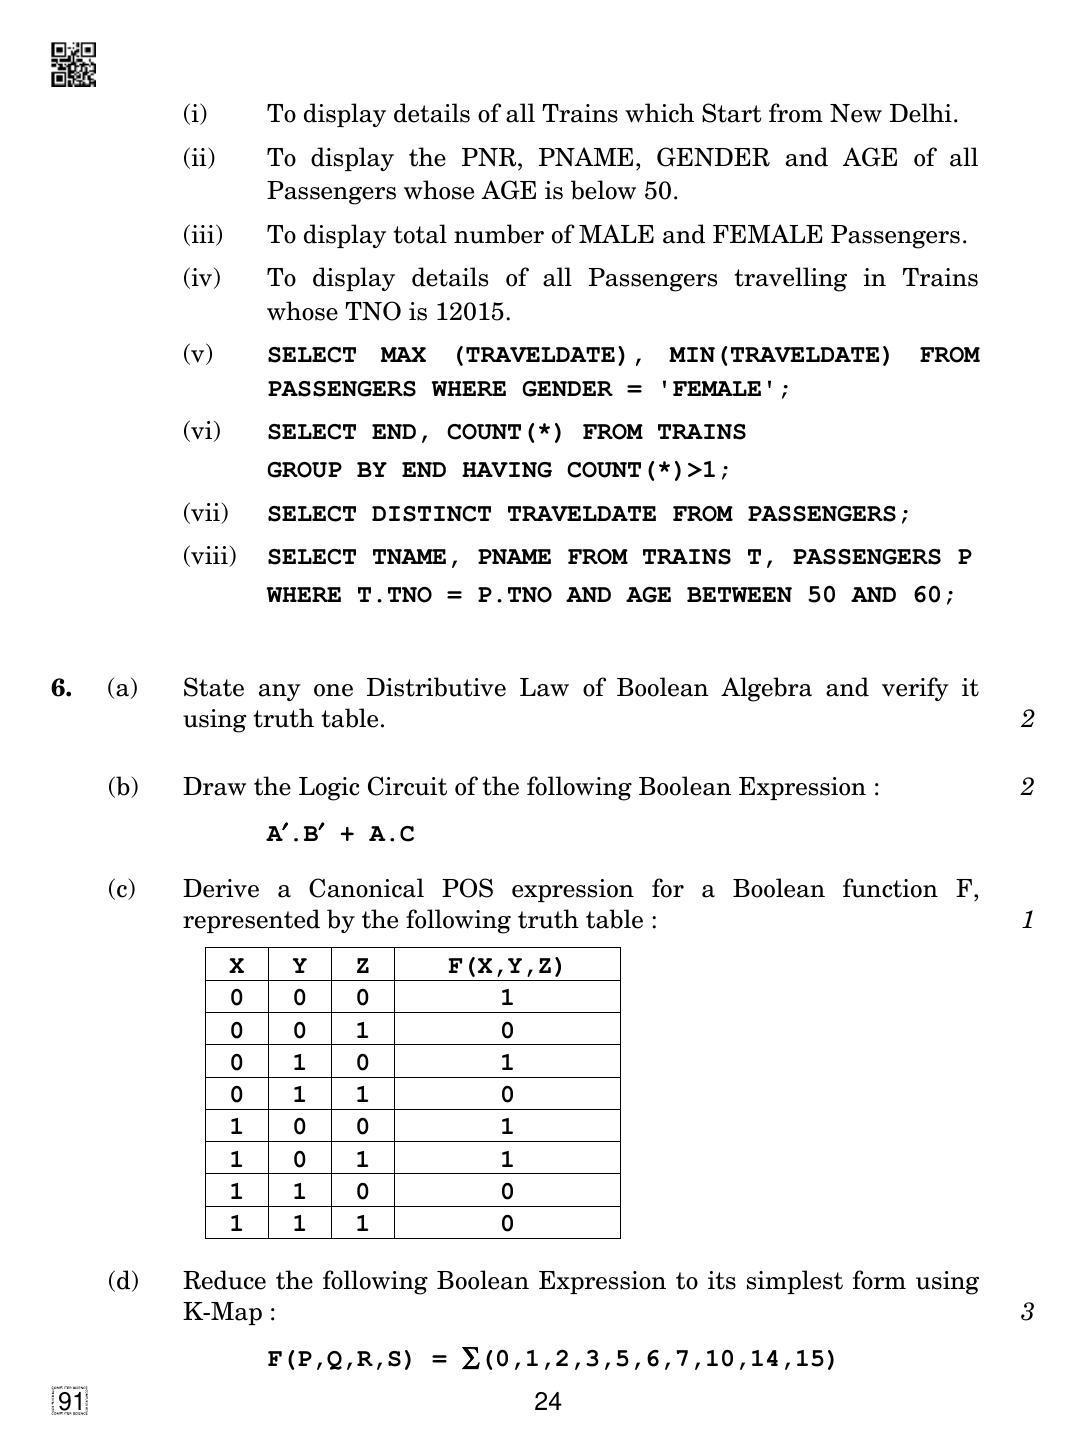 CBSE Class 12 91 Computer Science 2019 Question Paper - Page 24